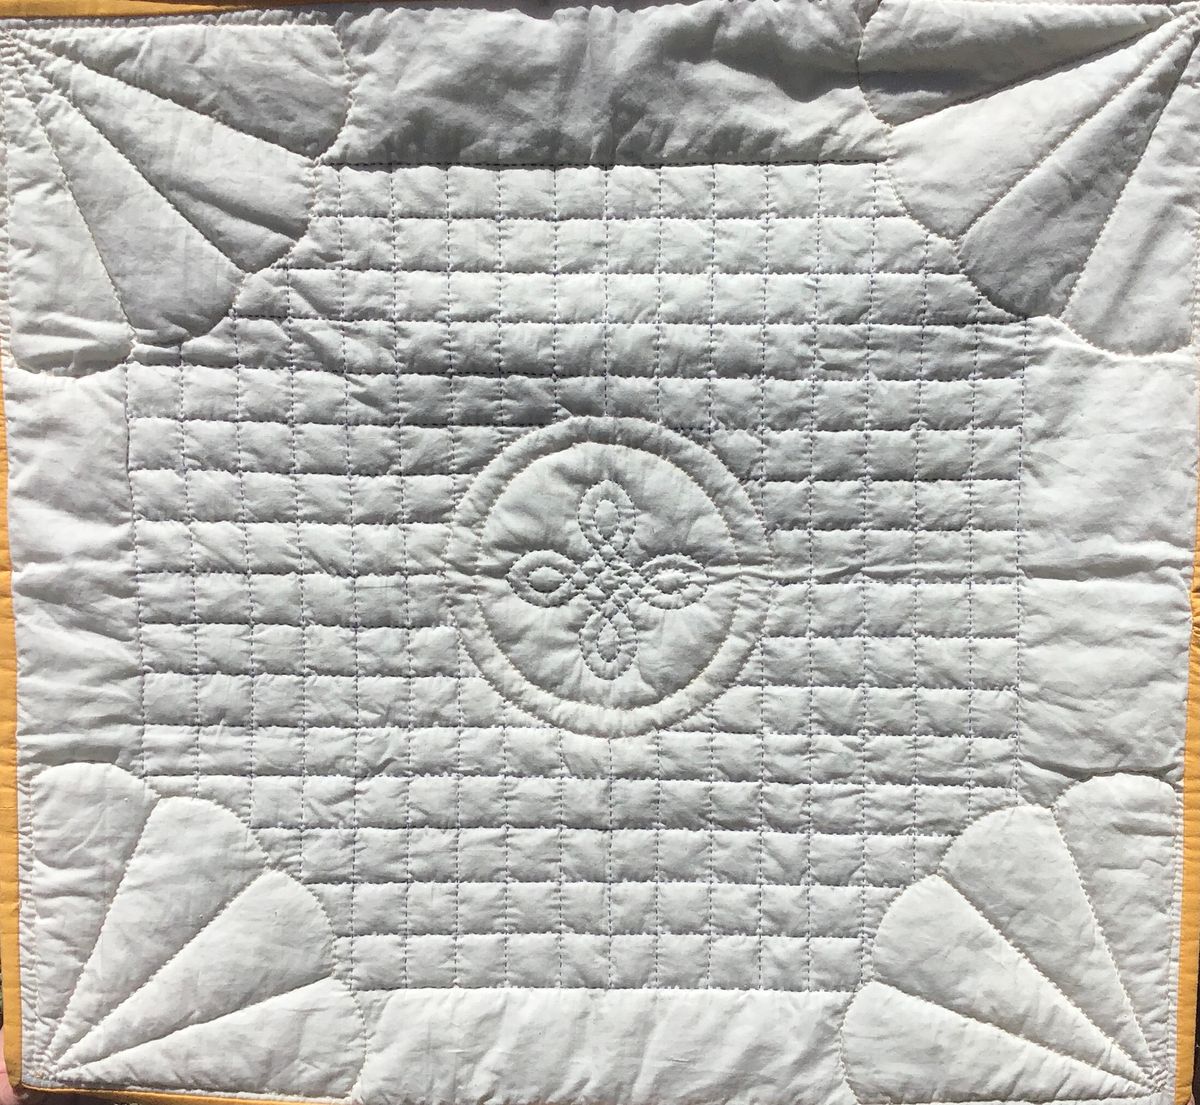 A 2-Day Quilting Workshop: Hand Quilting for Beginners with Pattie Klimek